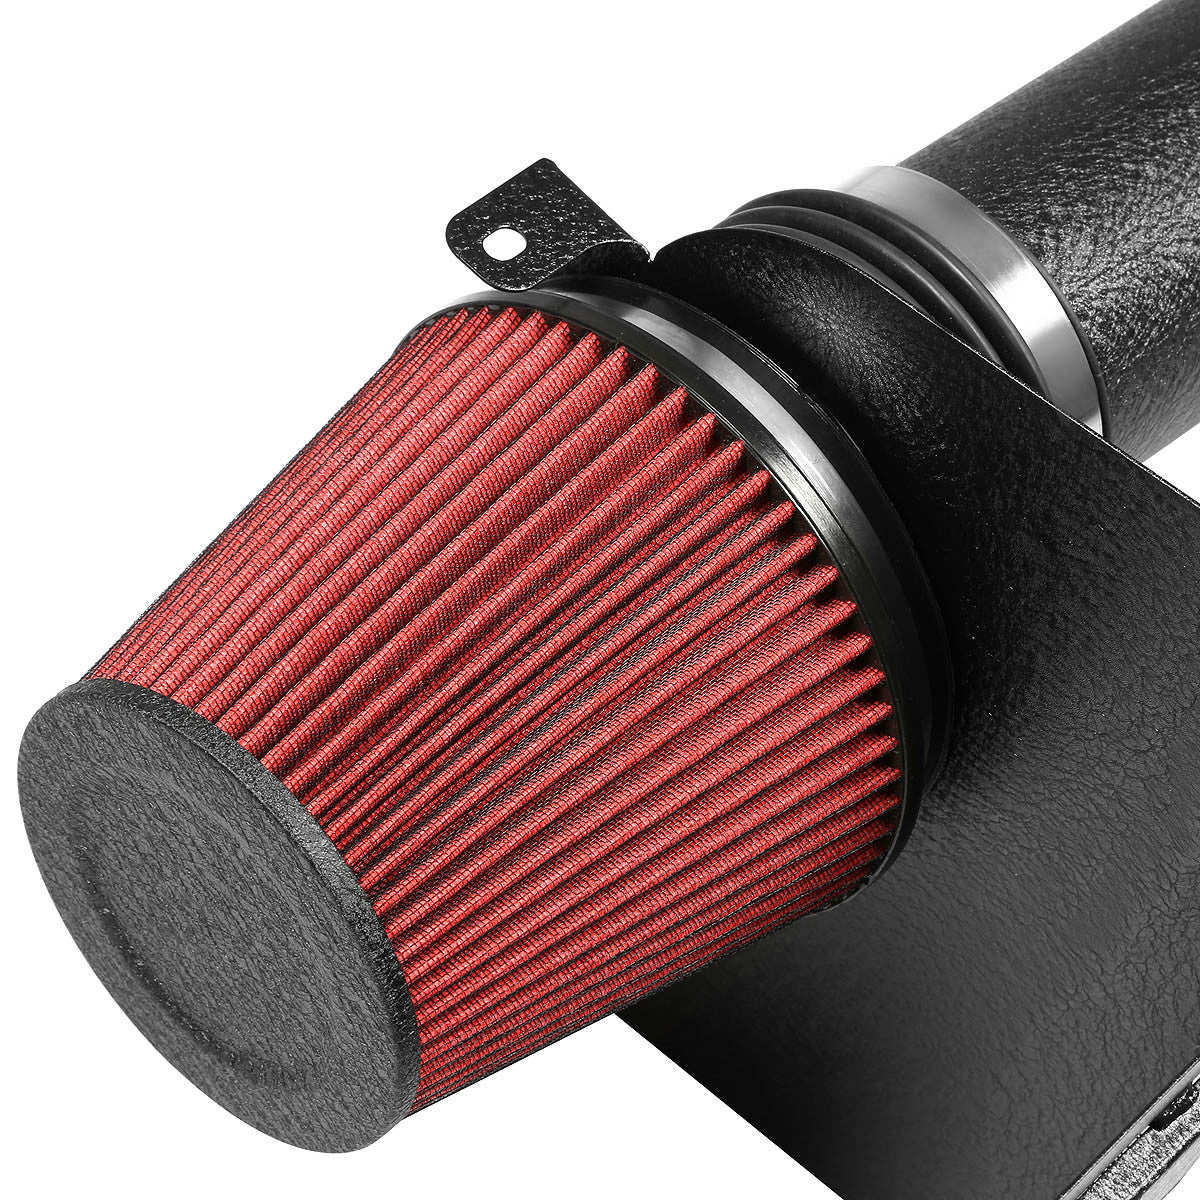 05-10 Chrysler 300 Dodge Charger 5.7L 6.1L Aluminum Cold Air Intake w/Heat Shield+Filter